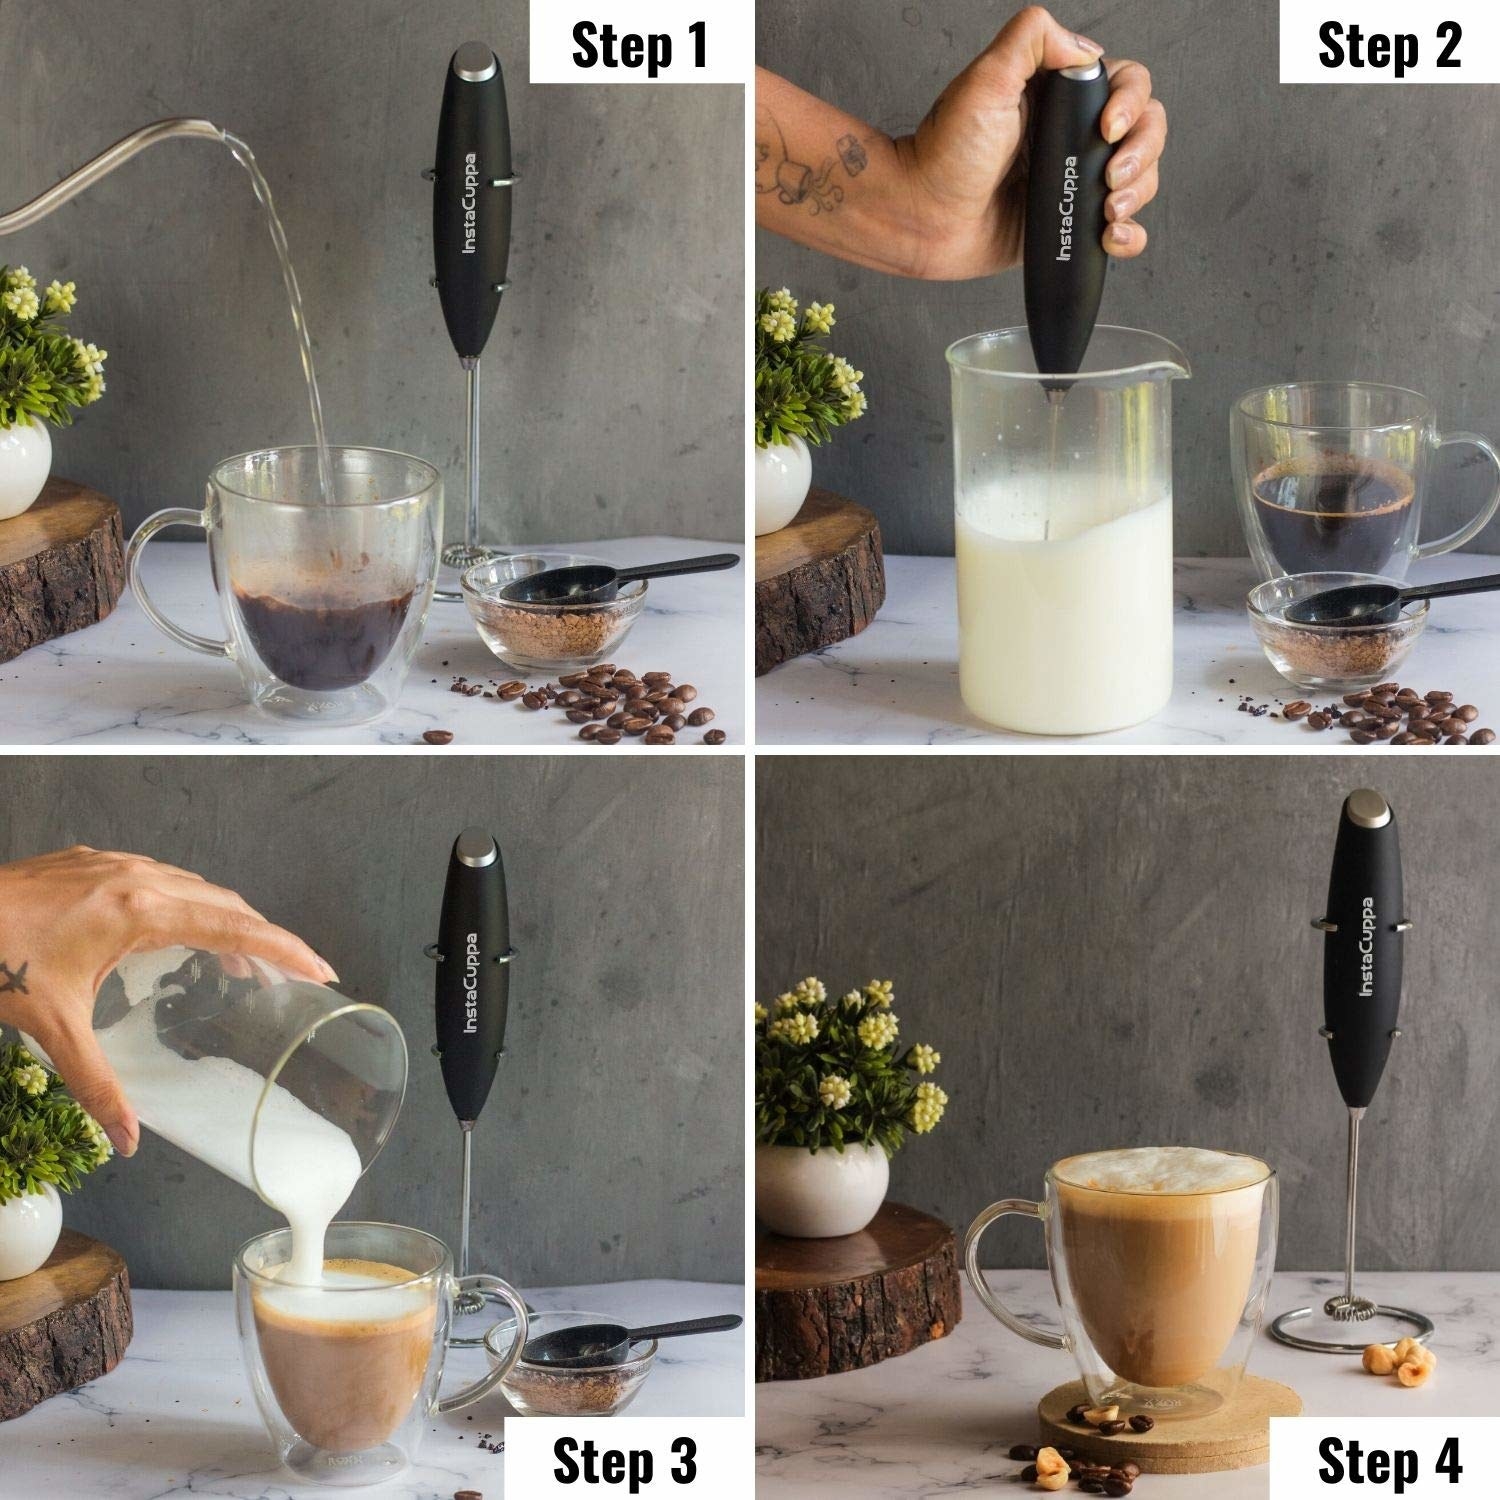 How To Use Your InstaCuppa Travel Milk Frother 